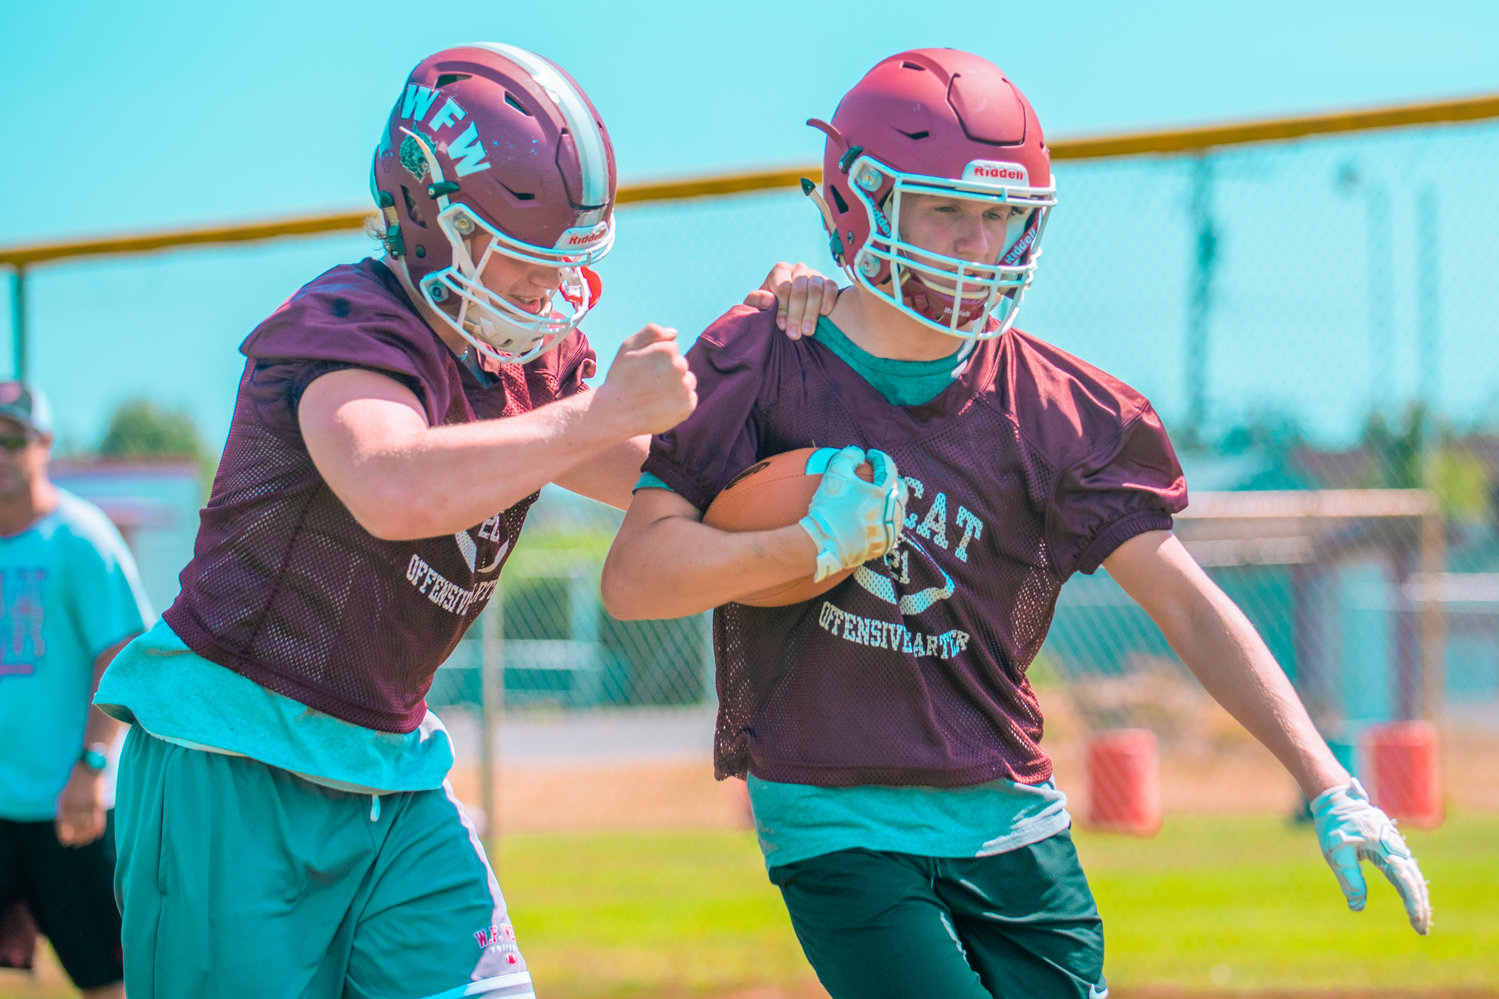 Brock Guyette tries to knock the ball out of teammate Jacob Fuller's hands during W.F. West's first football practice of the season on Wednesday.